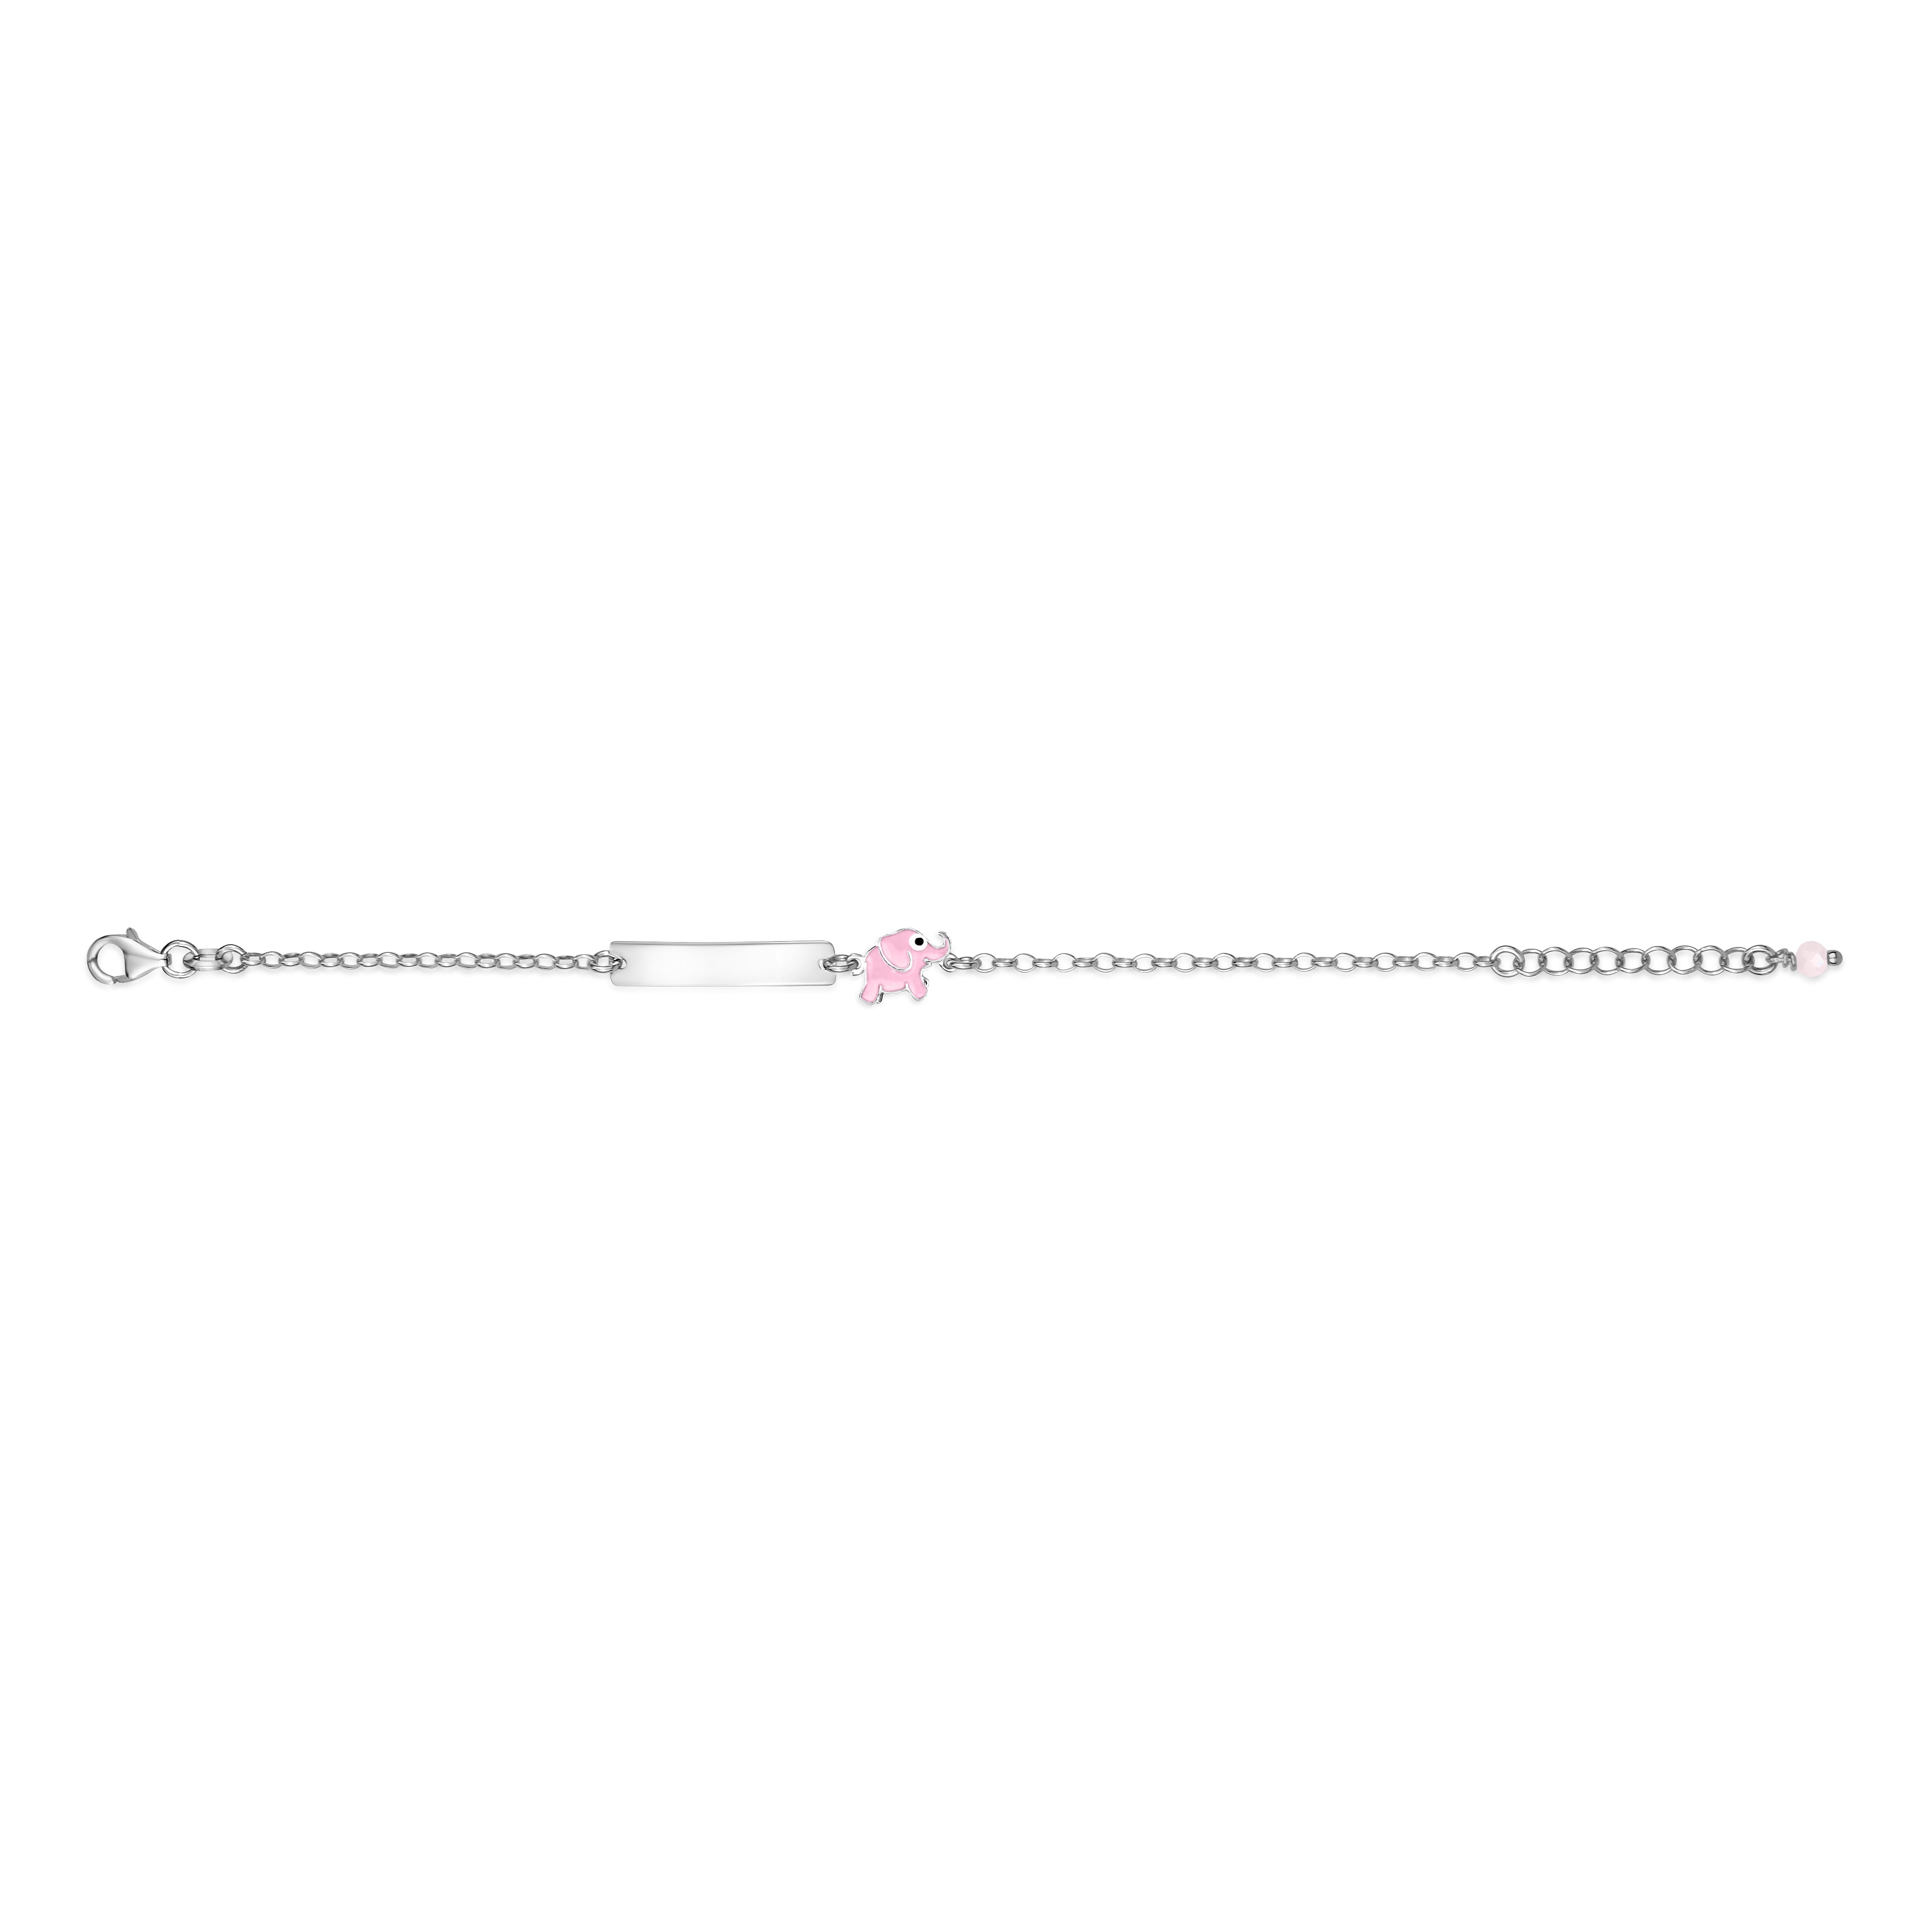 UNICORNJ Sterling Silver 925 Engravable ID Bracelet Rolo Chain for Girls Boys with Enamel 6.5"